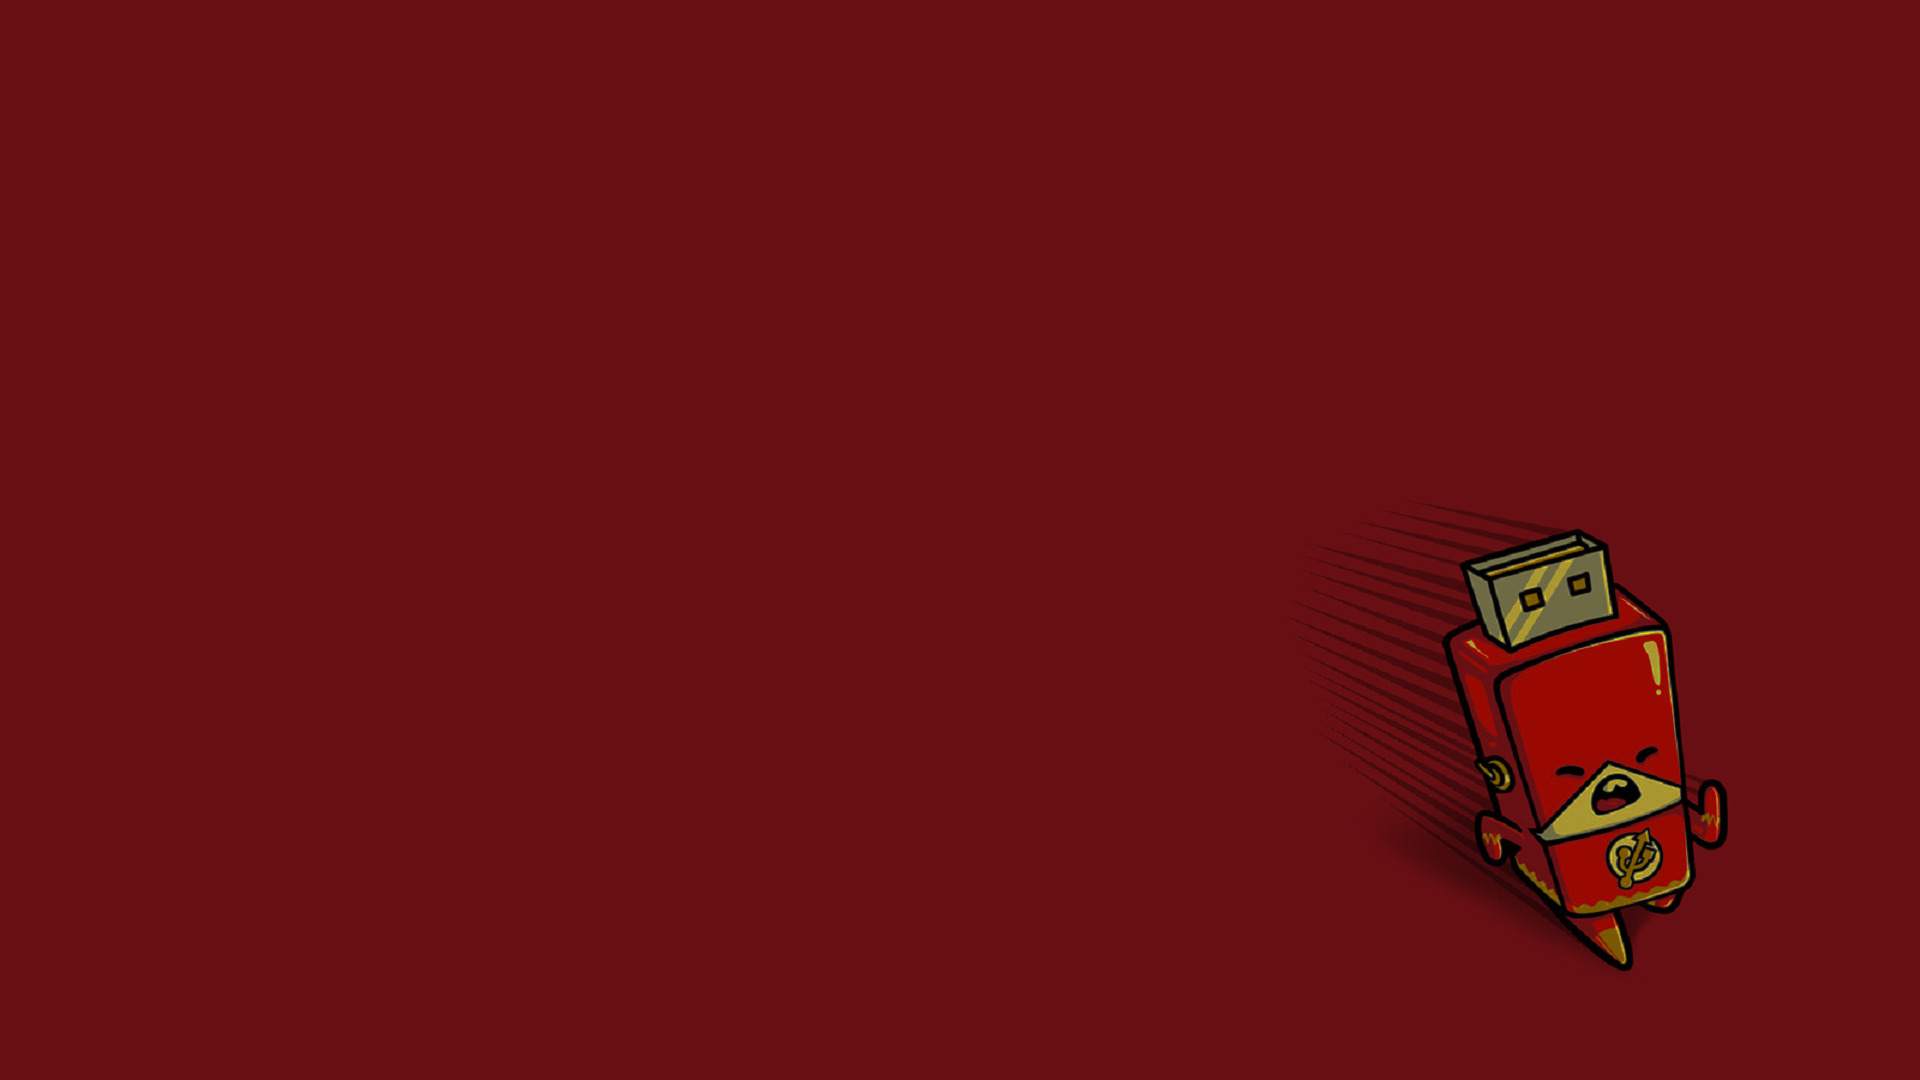 The Flash Computer Artwork Red Background Simple Background 1920x1080